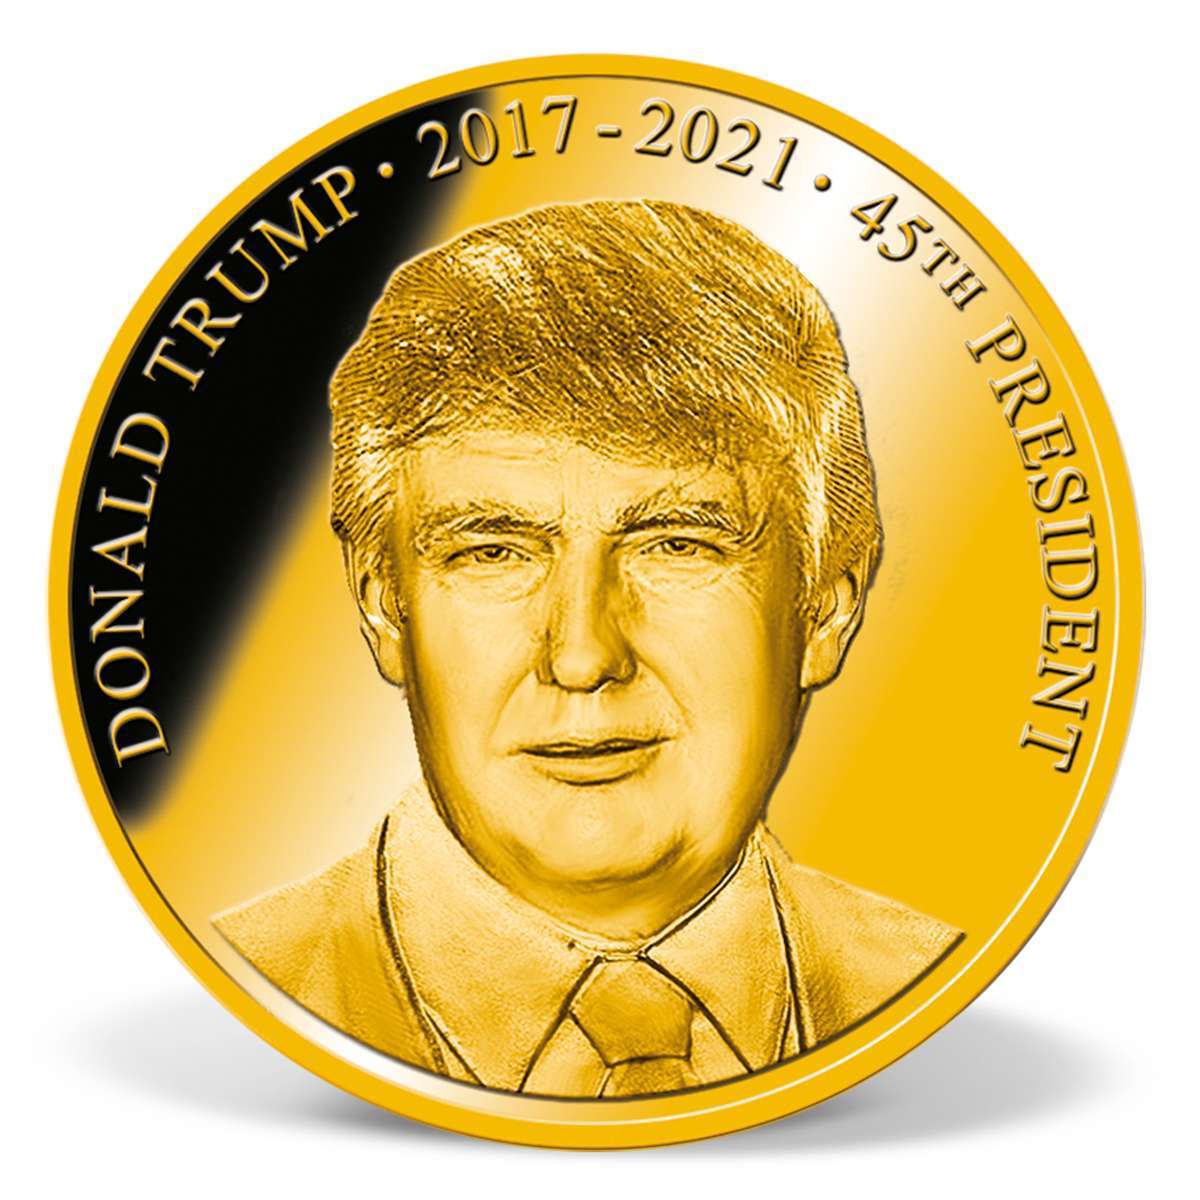 President Donald Trump Commemorative Coin | Gold-Layered | Gold ...